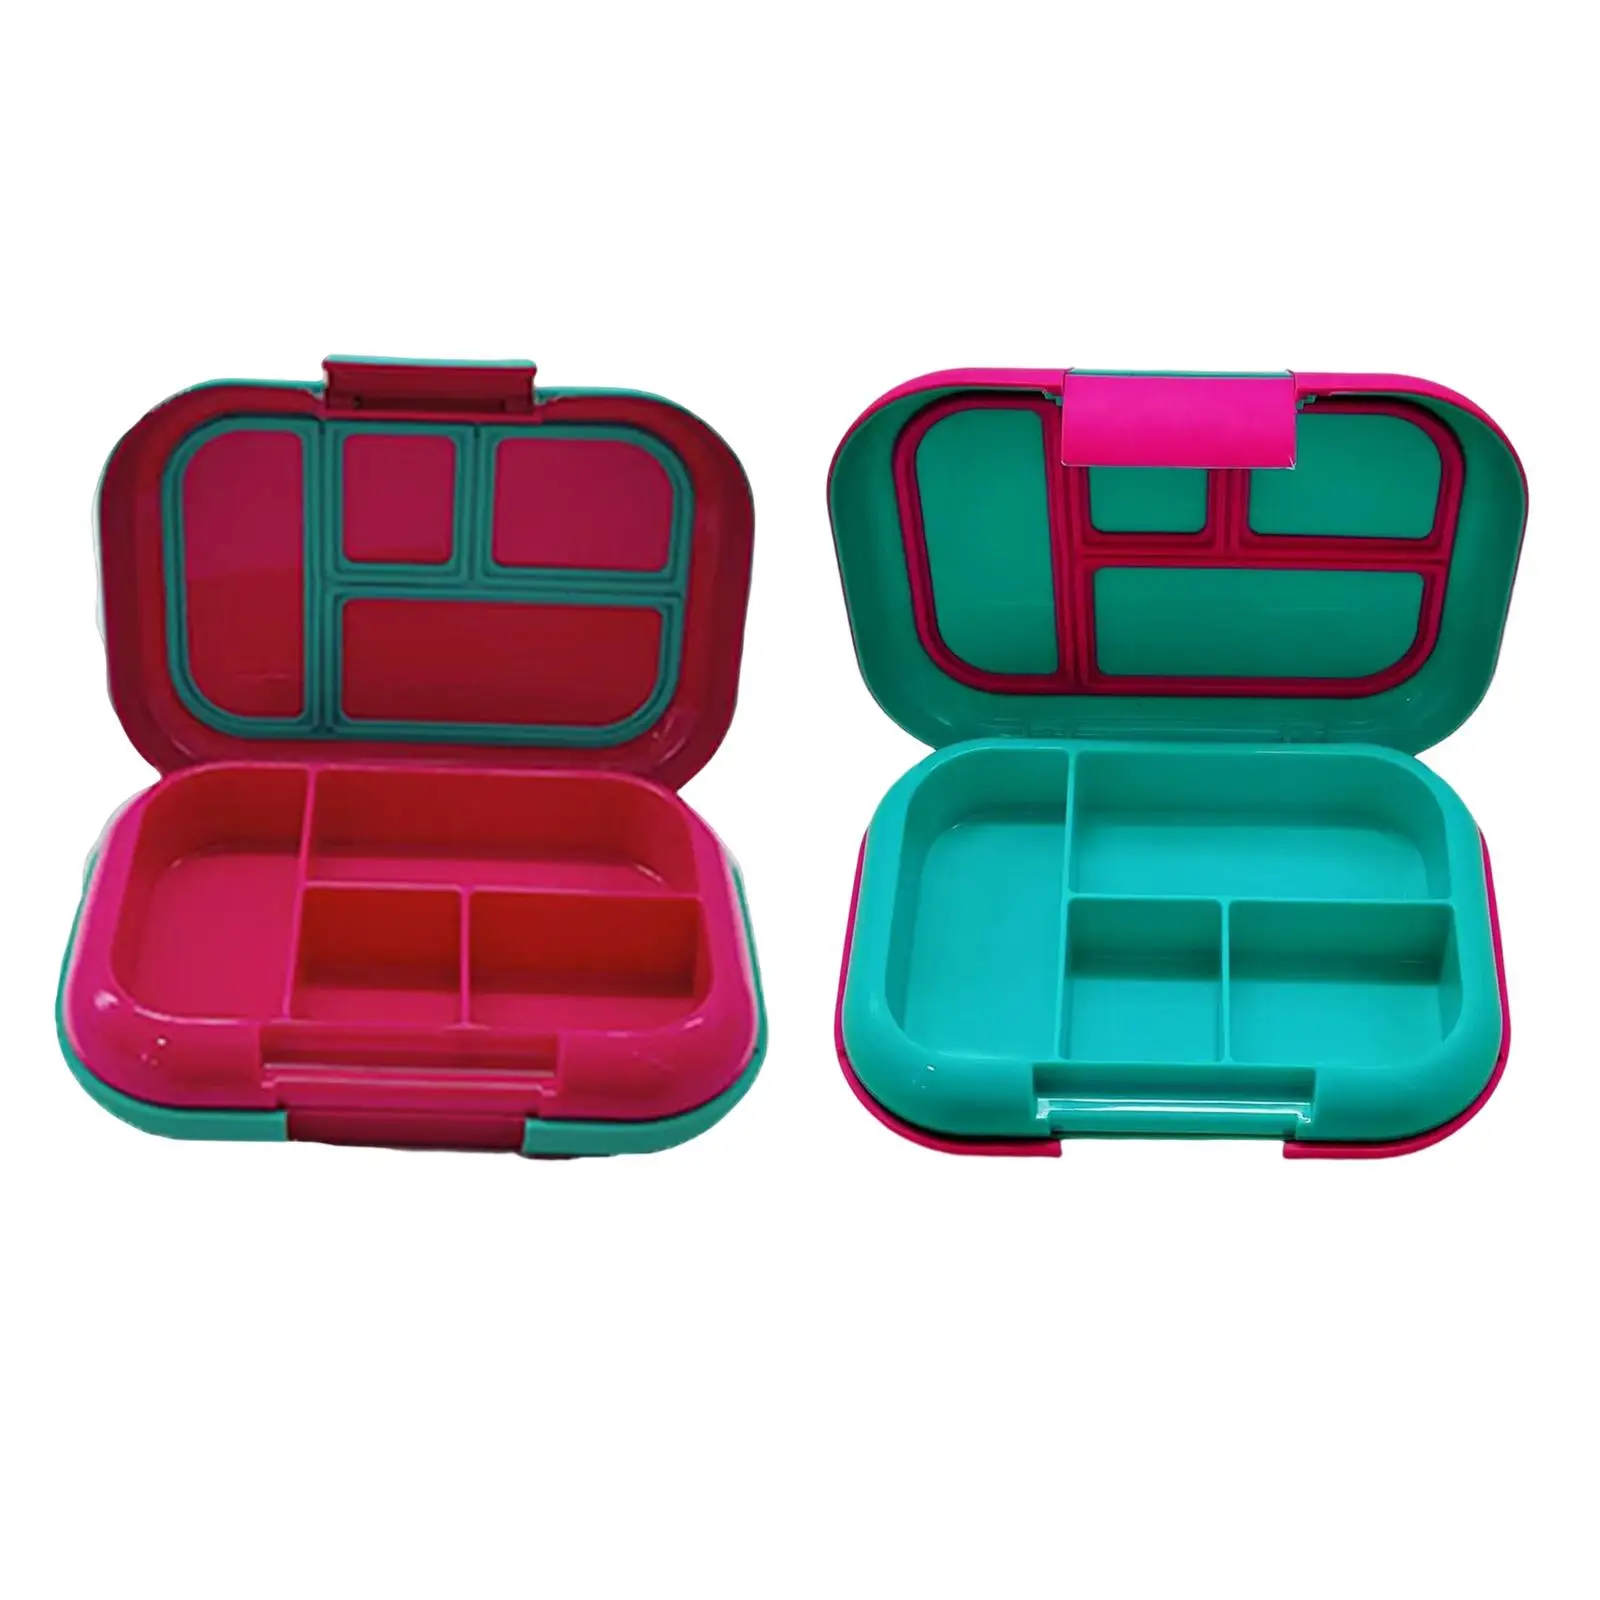 Portable Lunch Containers Food Storage Container for Picnic Camping